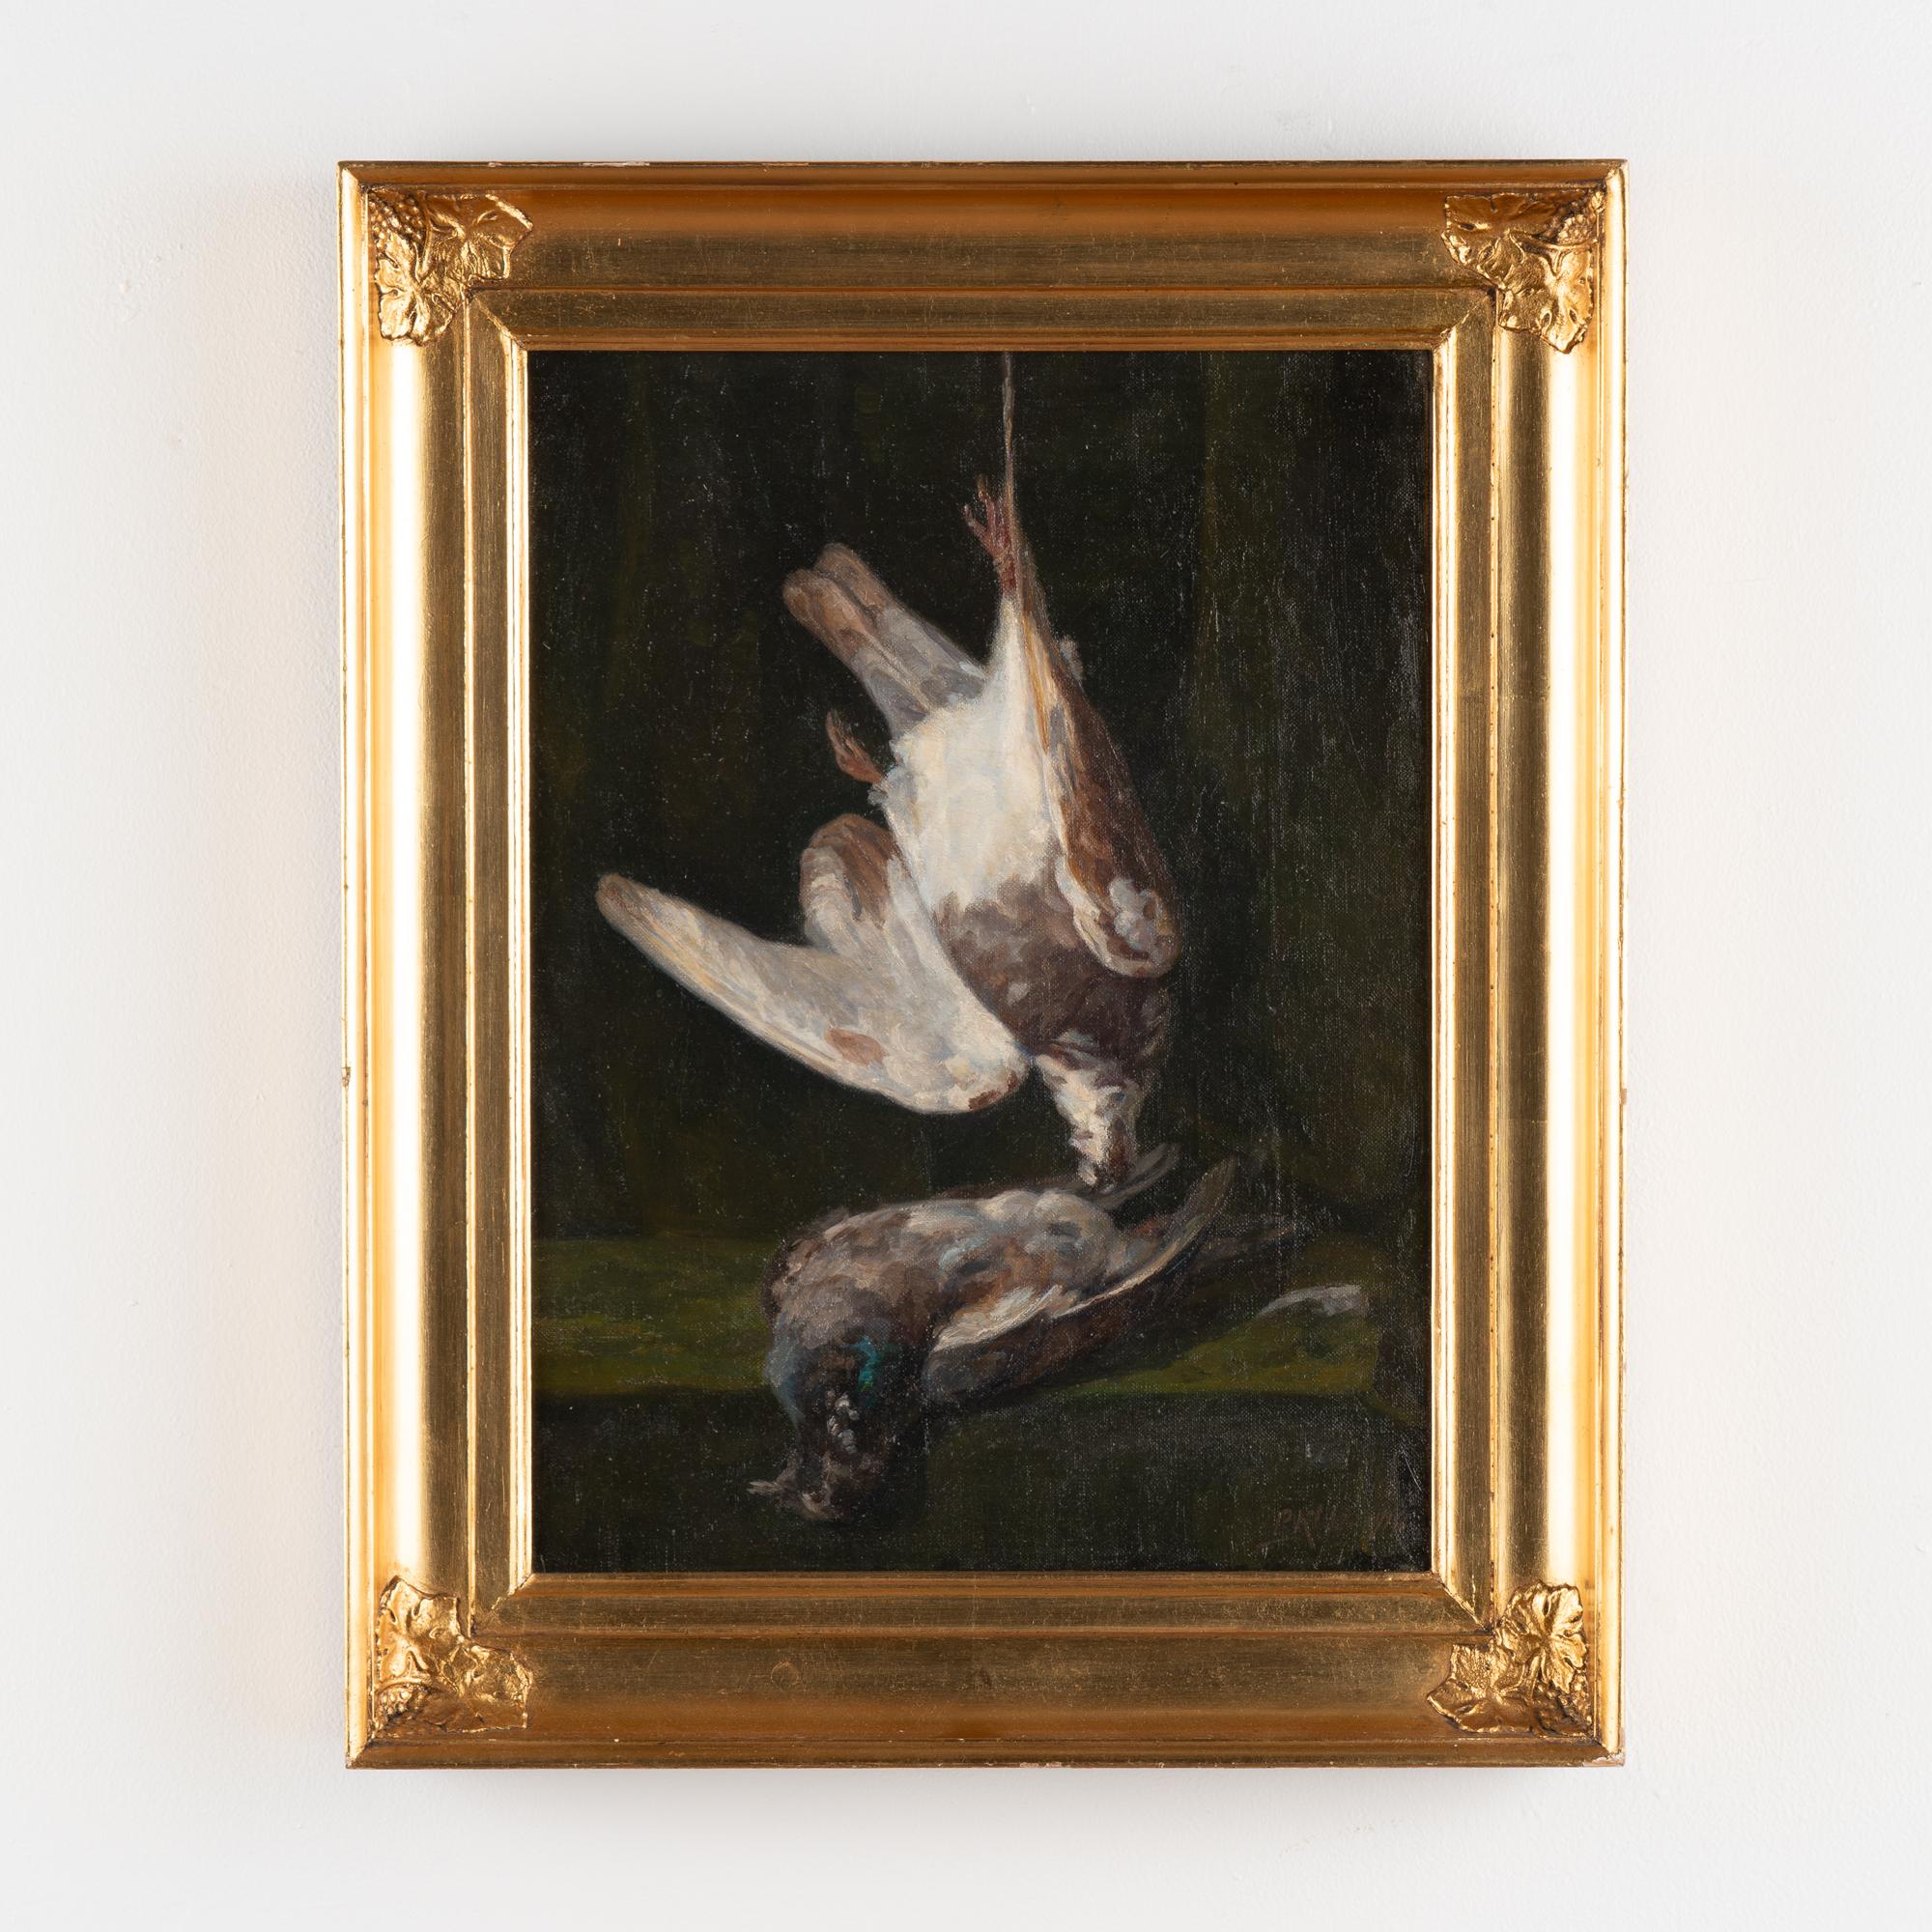 Original oil on canvas still life with birds. Signed and dated P. Klitz 1918. 
Artist: Peter Klitz (b. Assens 1874, d. 1955)
Condition:Minor craquelure and retouches. May benefit from a light surface cleaning but not necessary. Minor